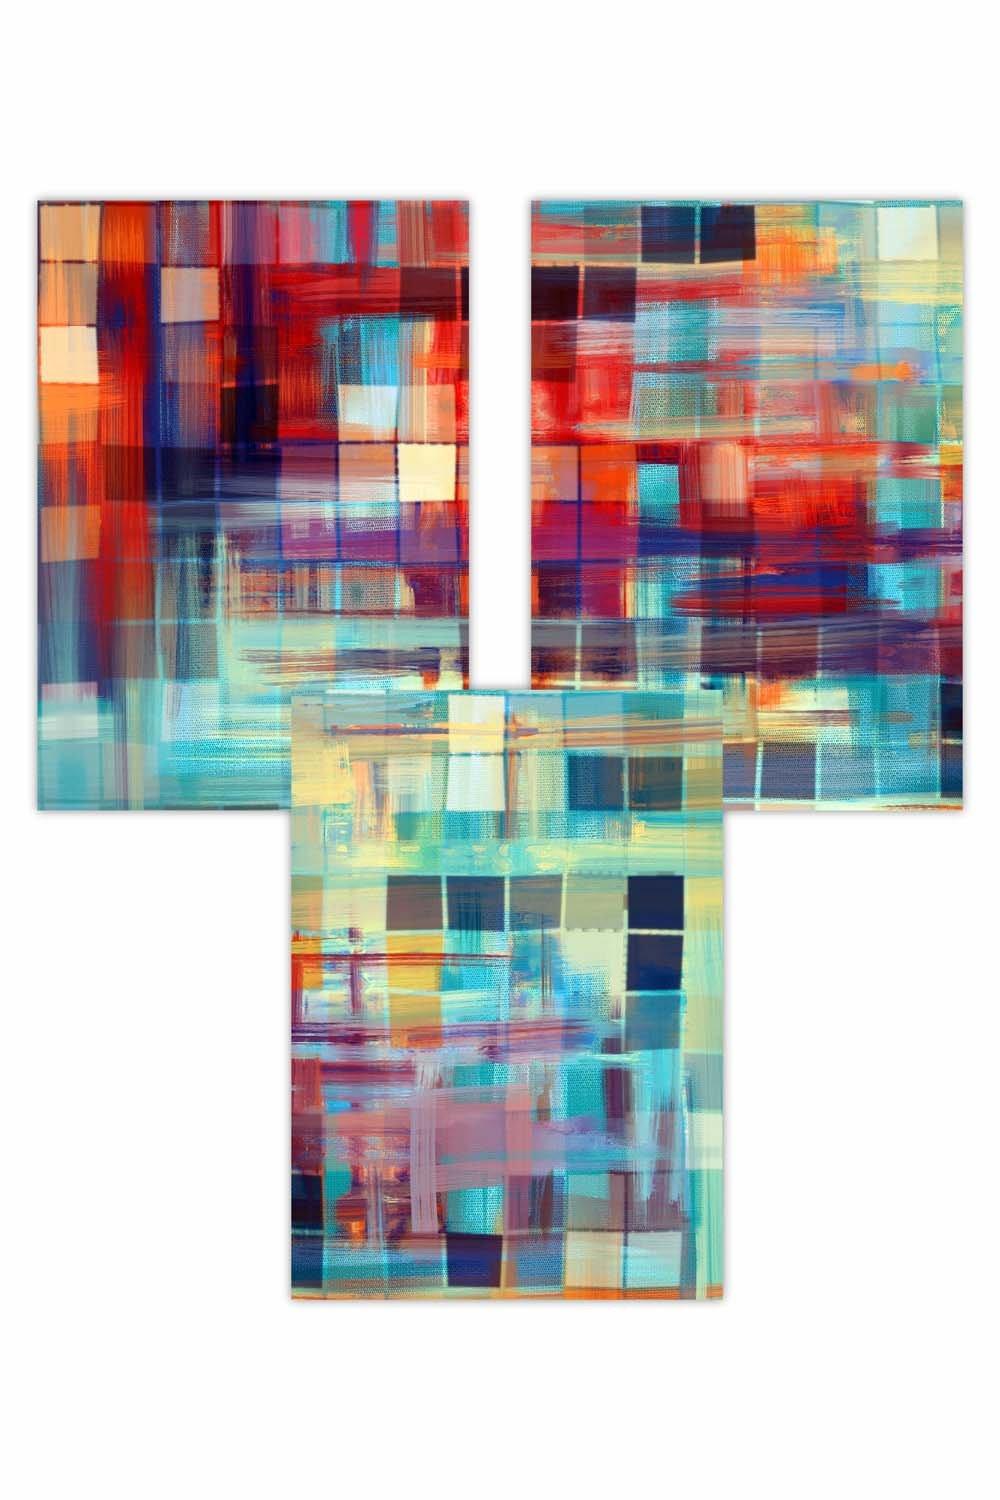 Set of 3 Geometric Abstract Colourful Squares Art Posters